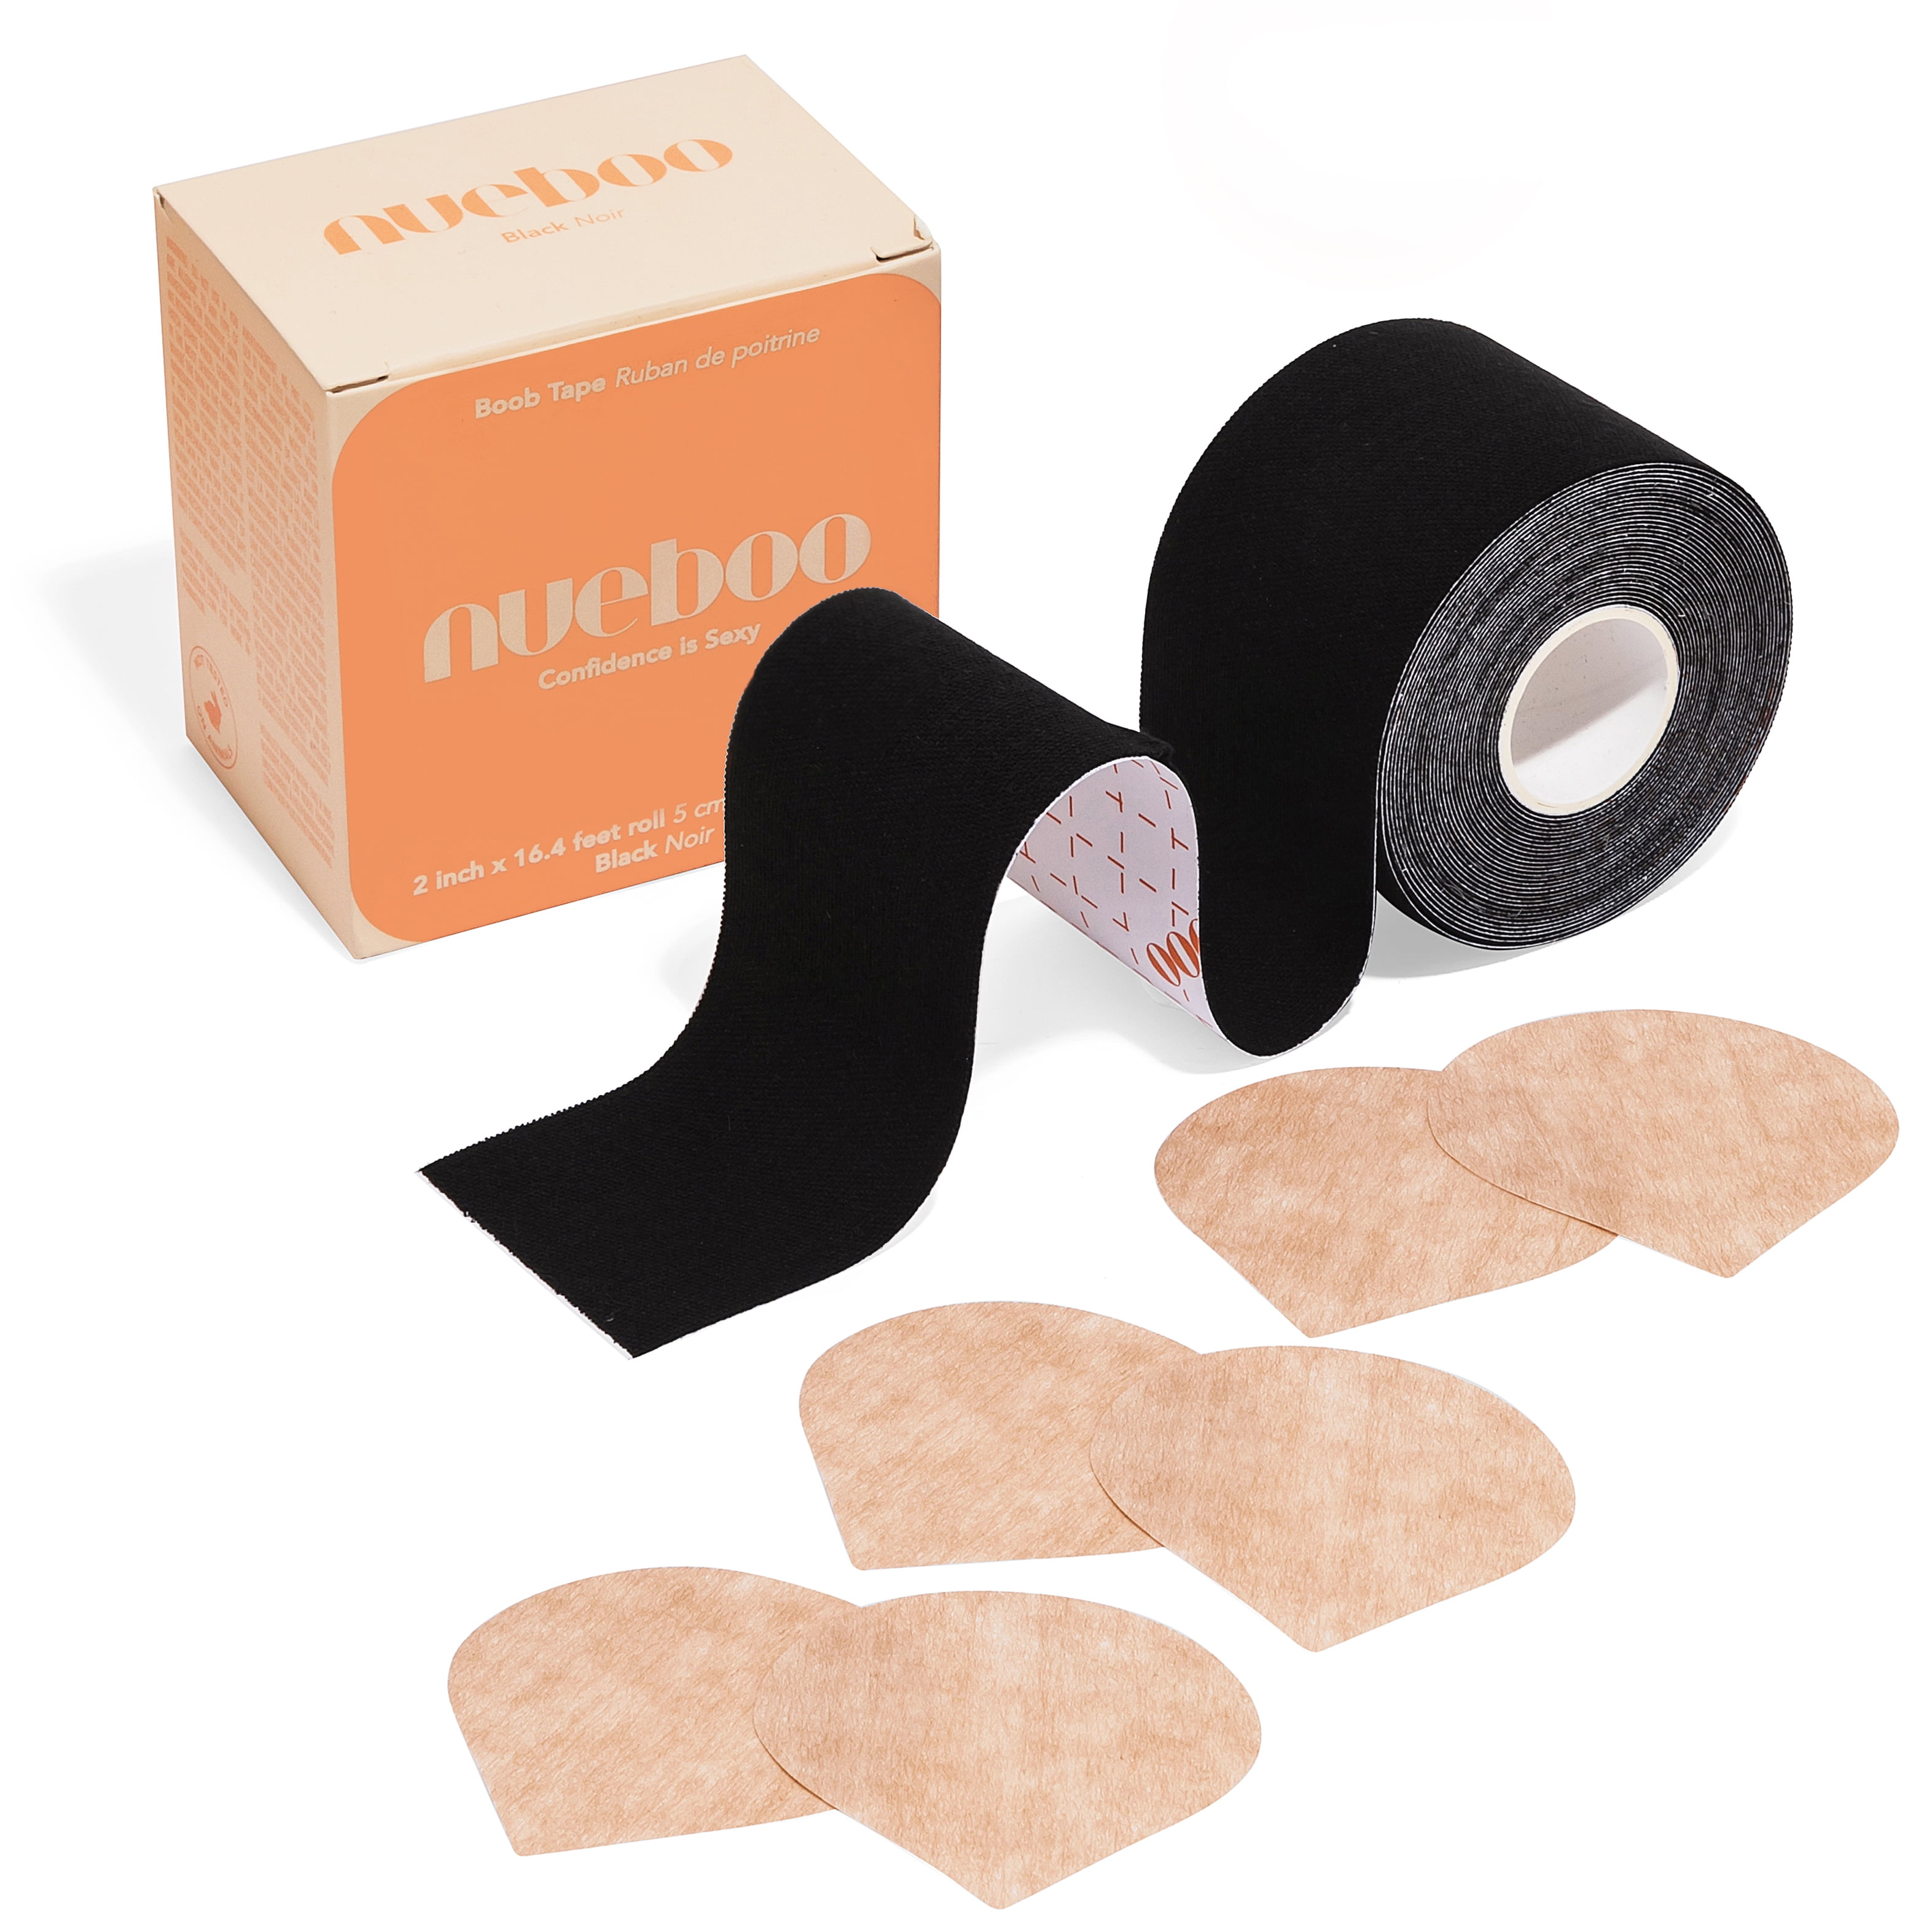 Nueboo Boob Tape + Nipple Covers, Breast Lift Tape- Instant Boob Lift &  Control, Body Tape for all Clothing Types, Long-lasting Waterproof Bra Tape